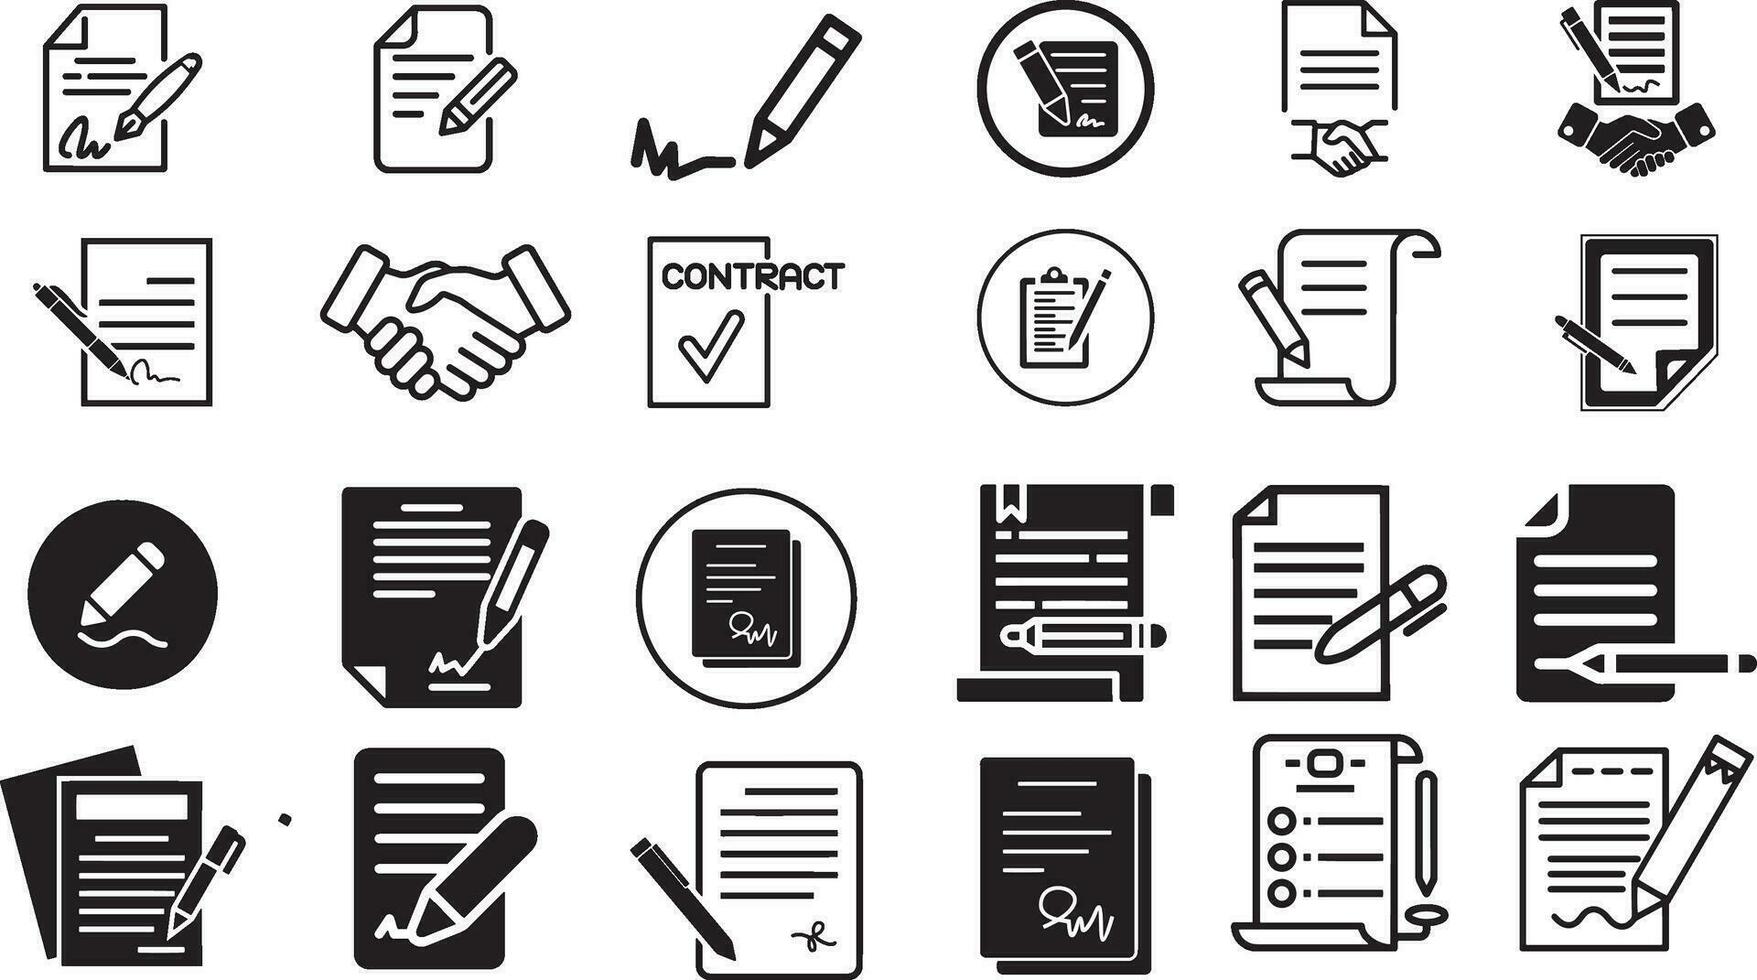 Pen signing a contract icon with signature, paper symbol isolated for graphic and web design. vector